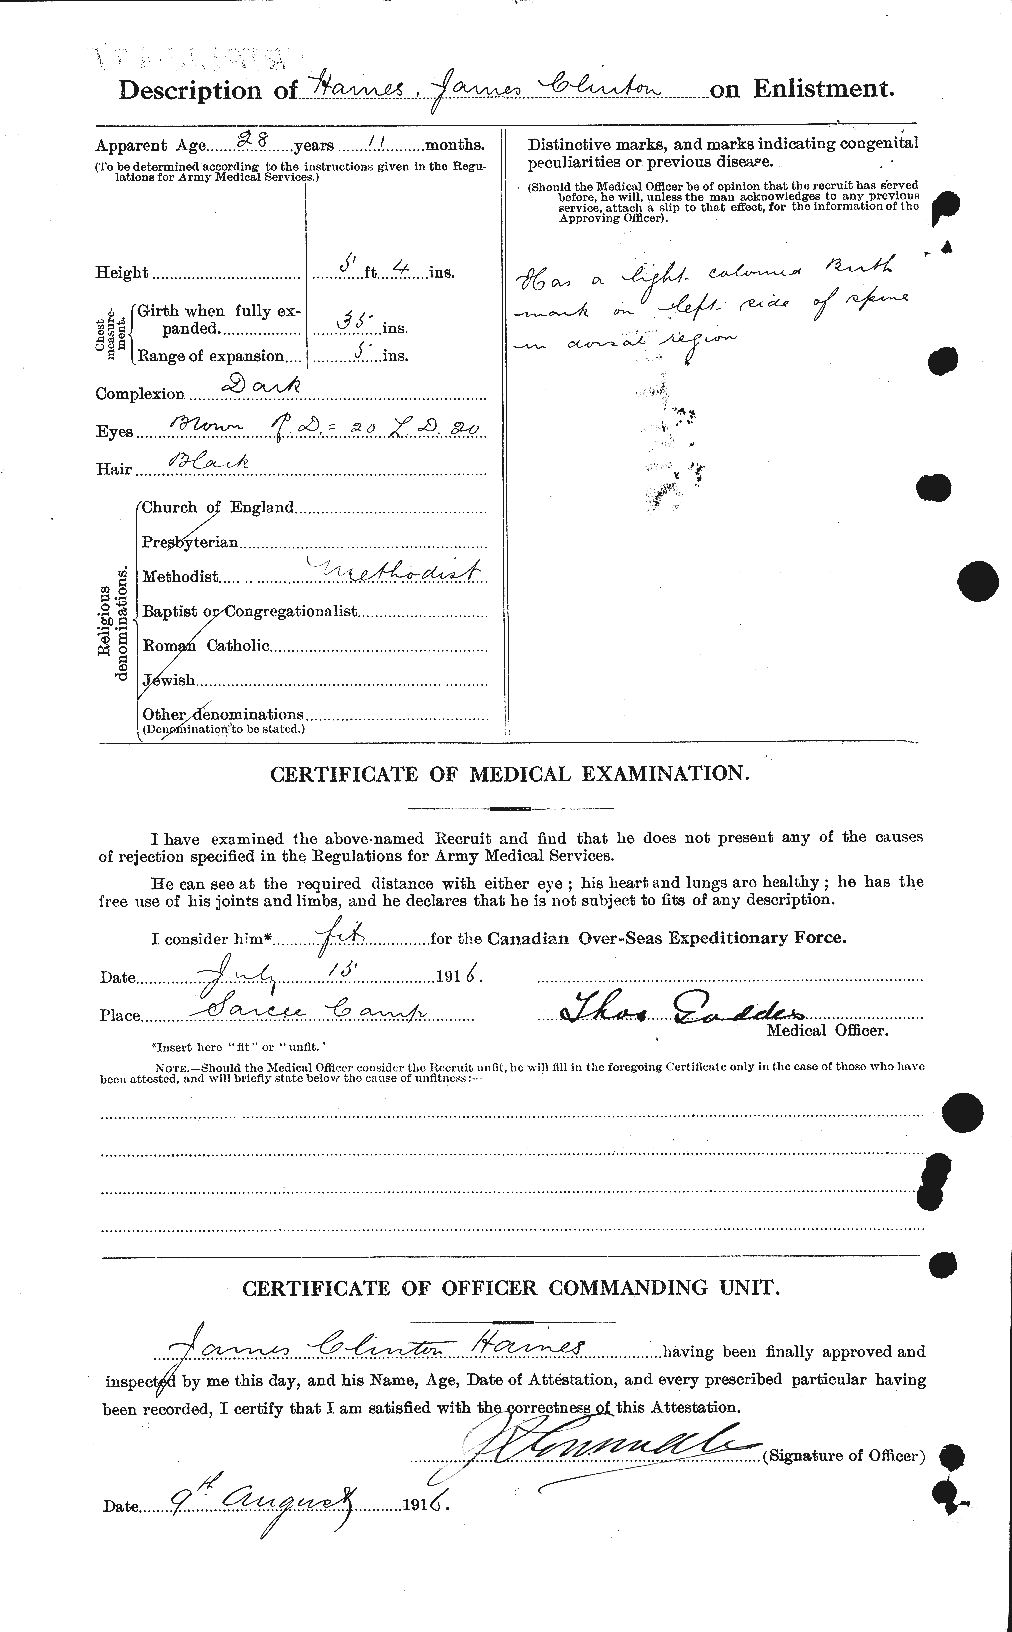 Personnel Records of the First World War - CEF 369201b